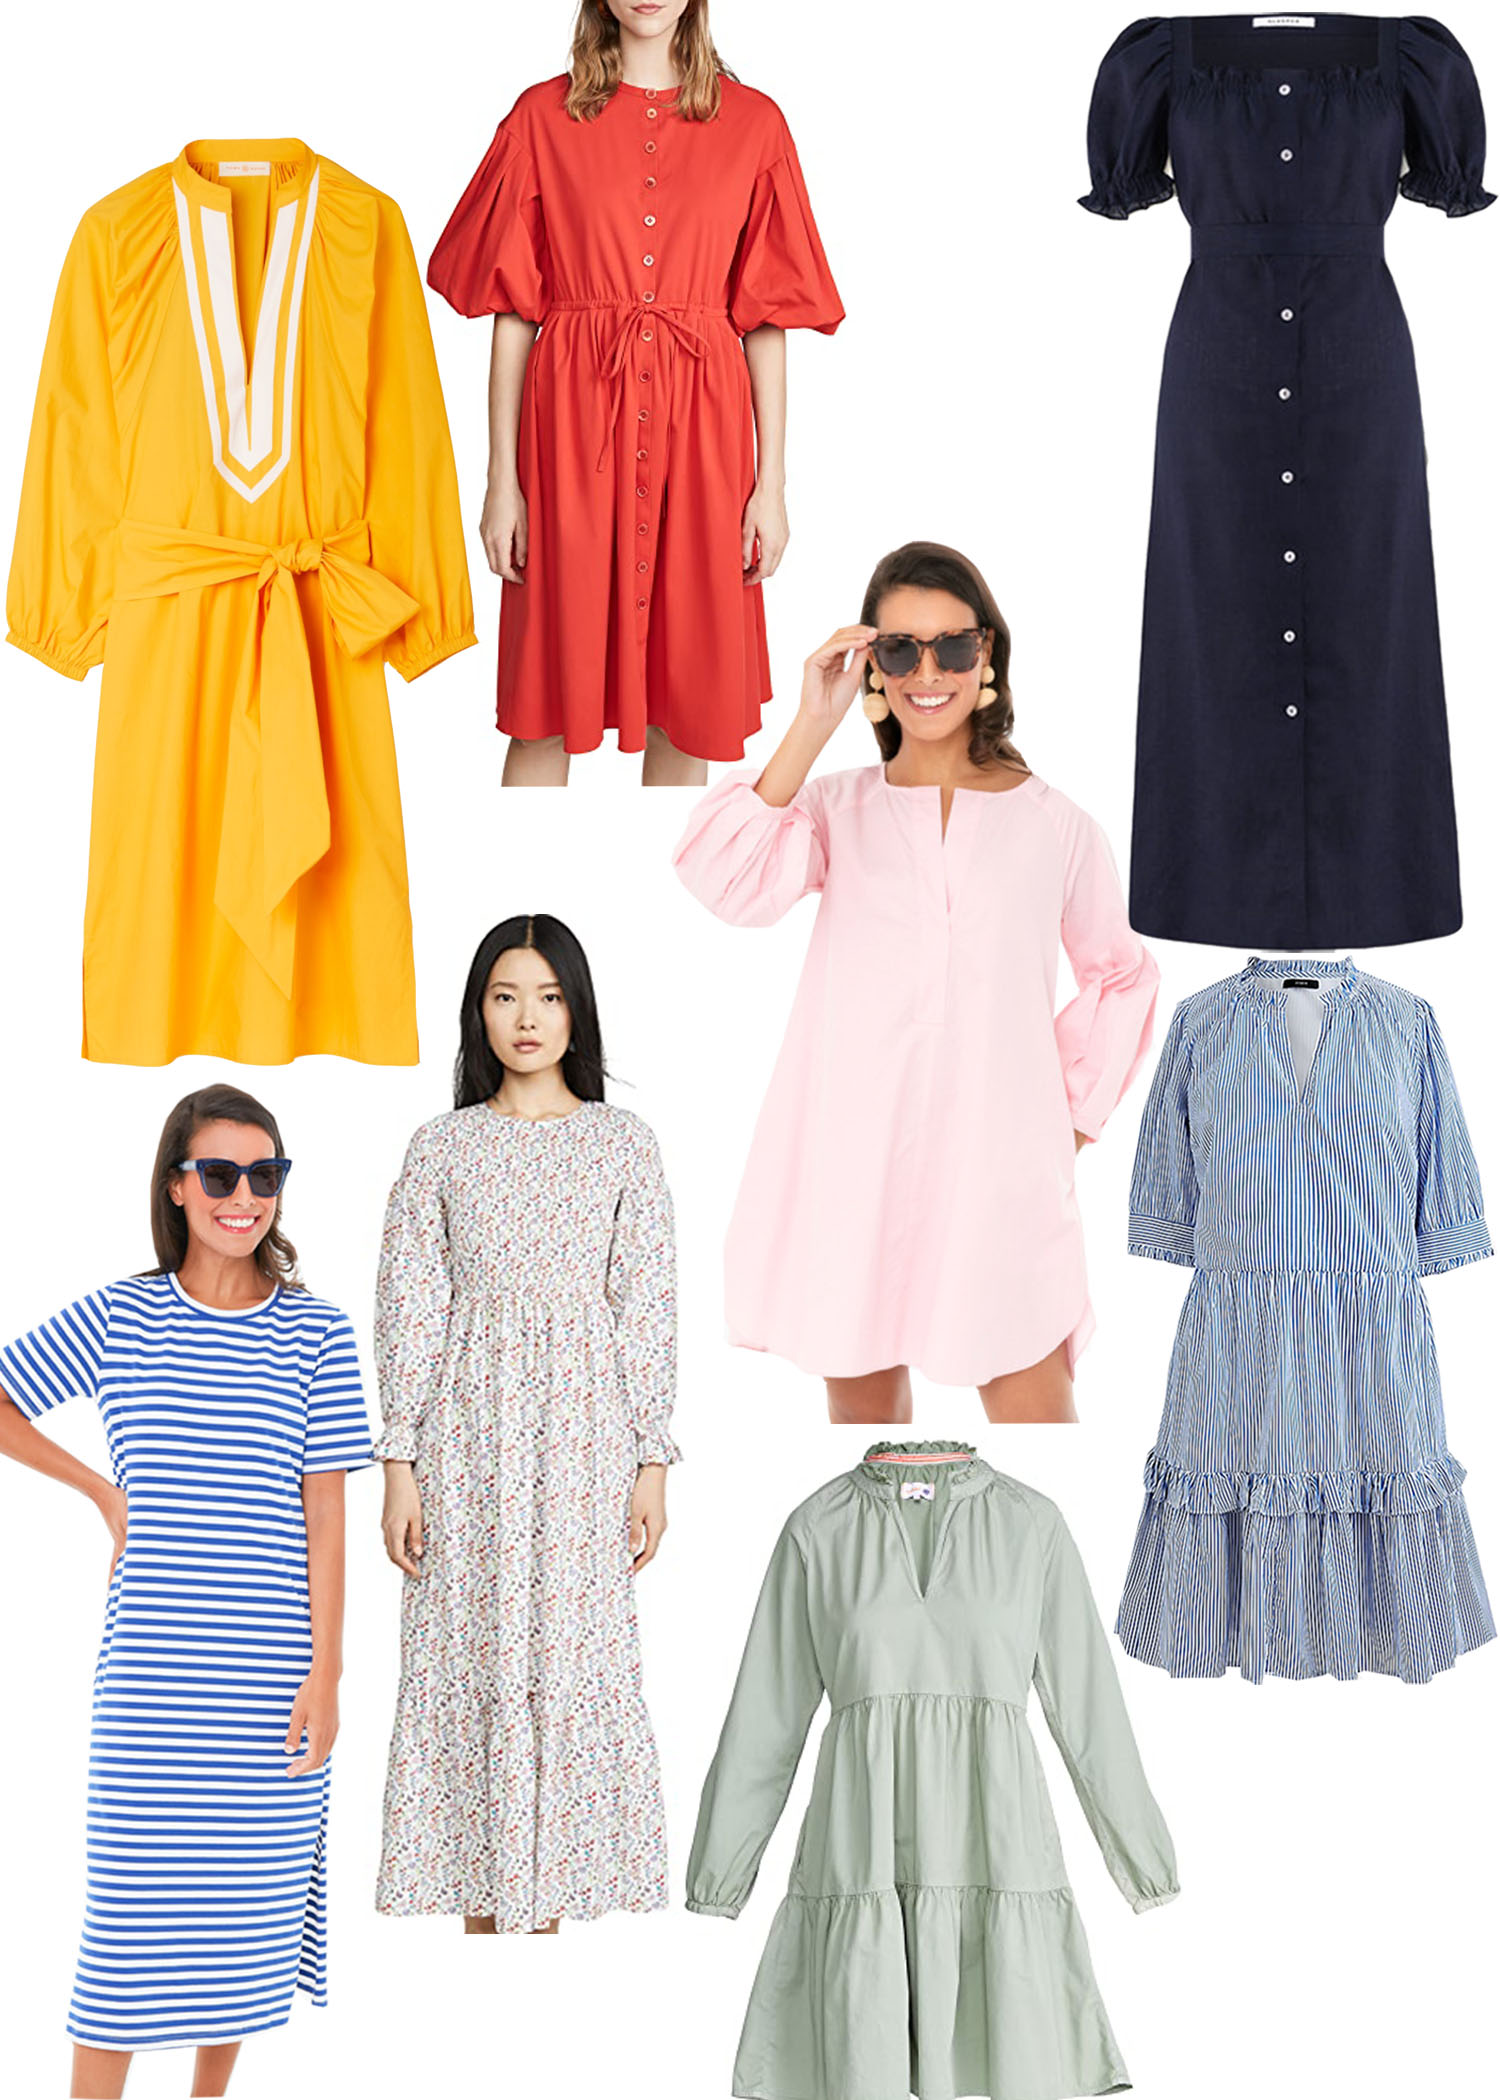 The 22 Most Comfortable House Dresses | Vogue